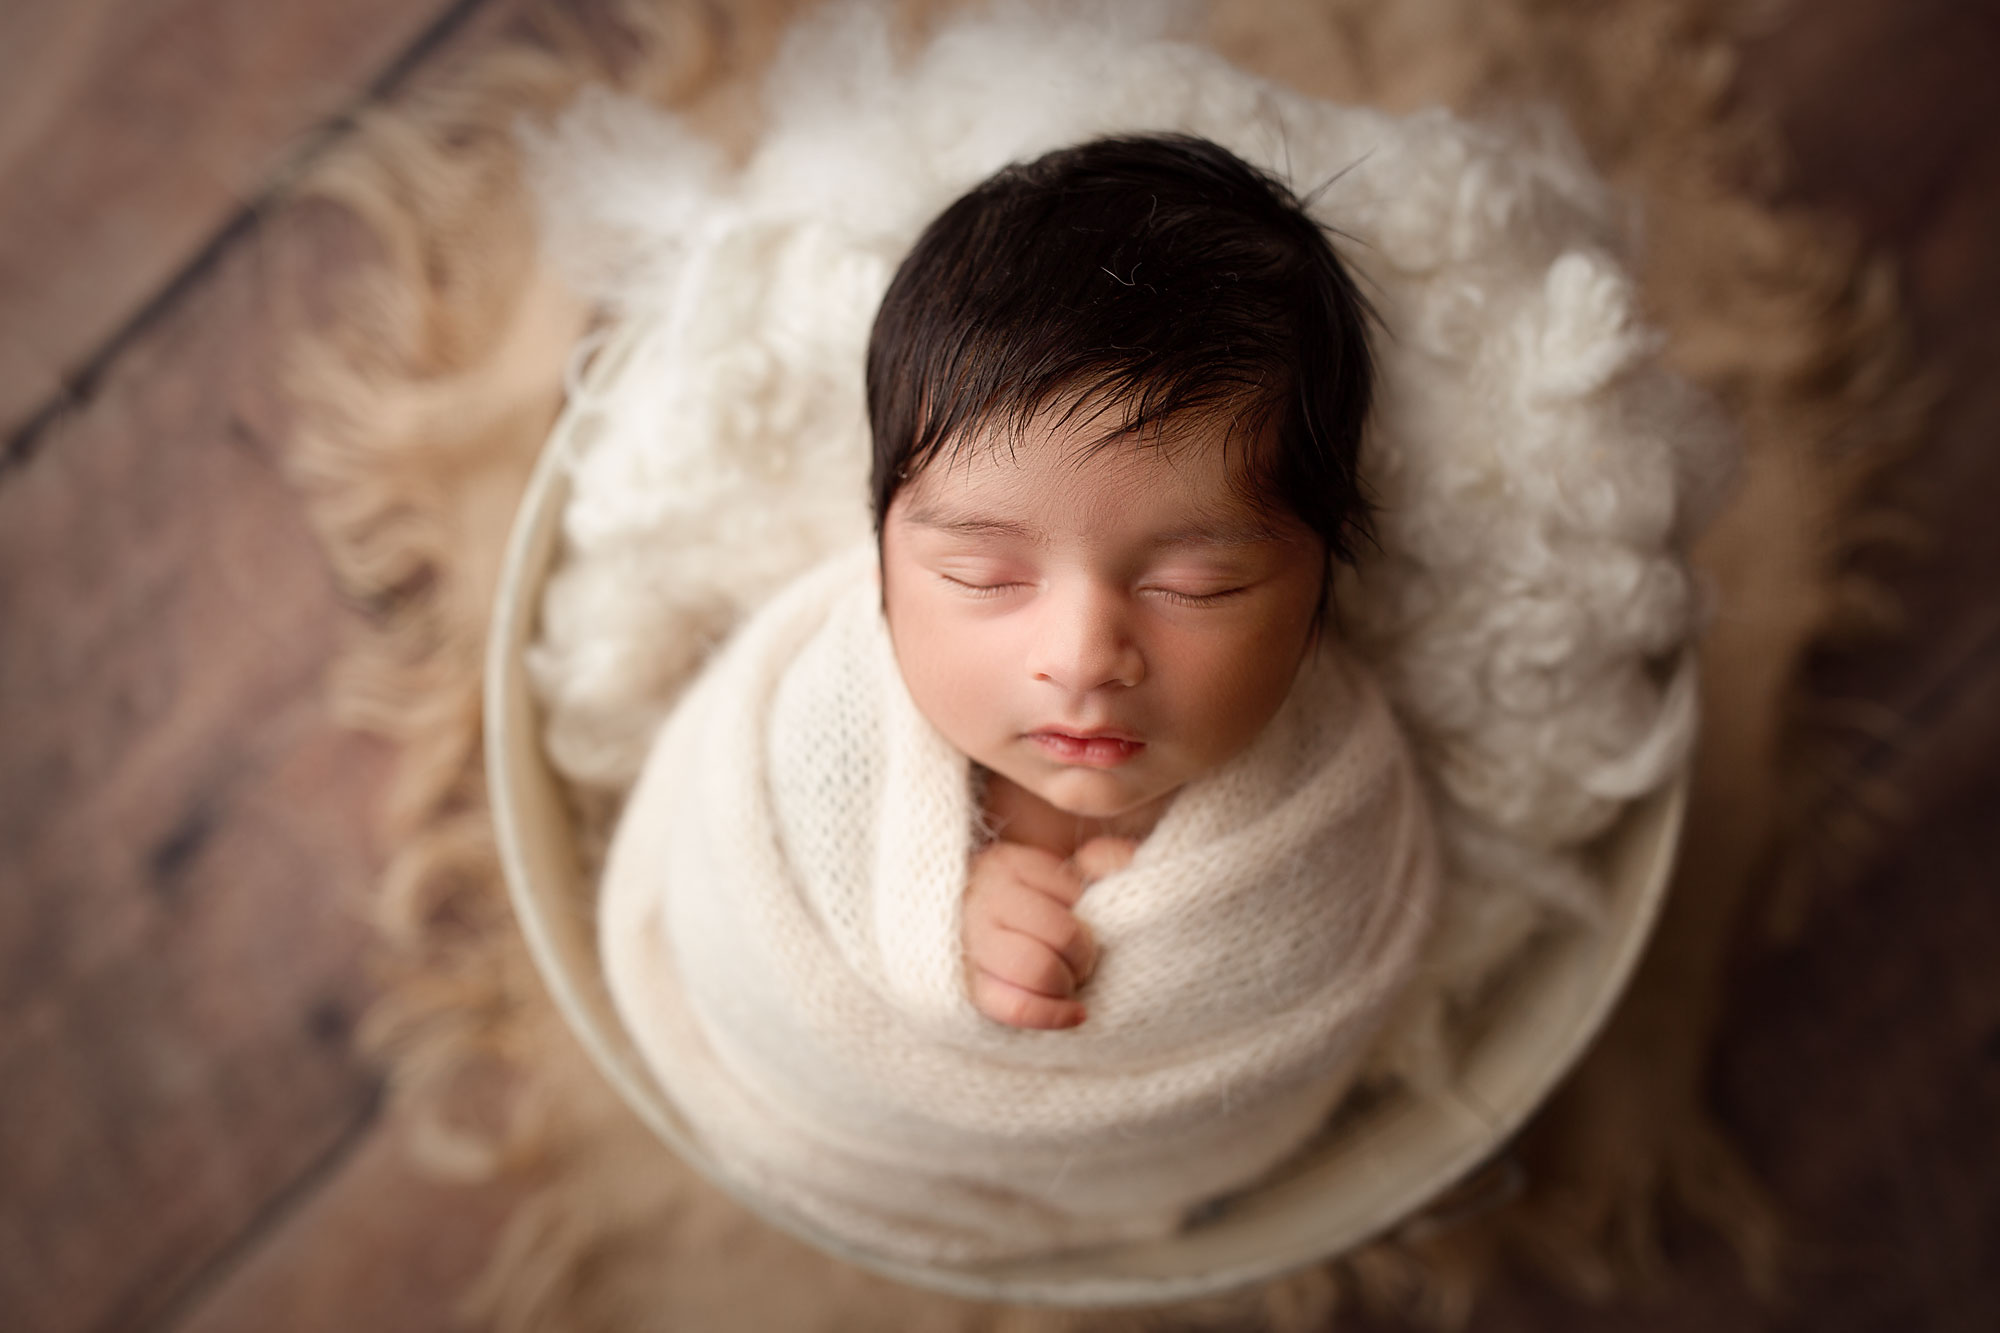 professional newborn photography session hackettstown nj, baby boy in white swaddle sleeping in bucket